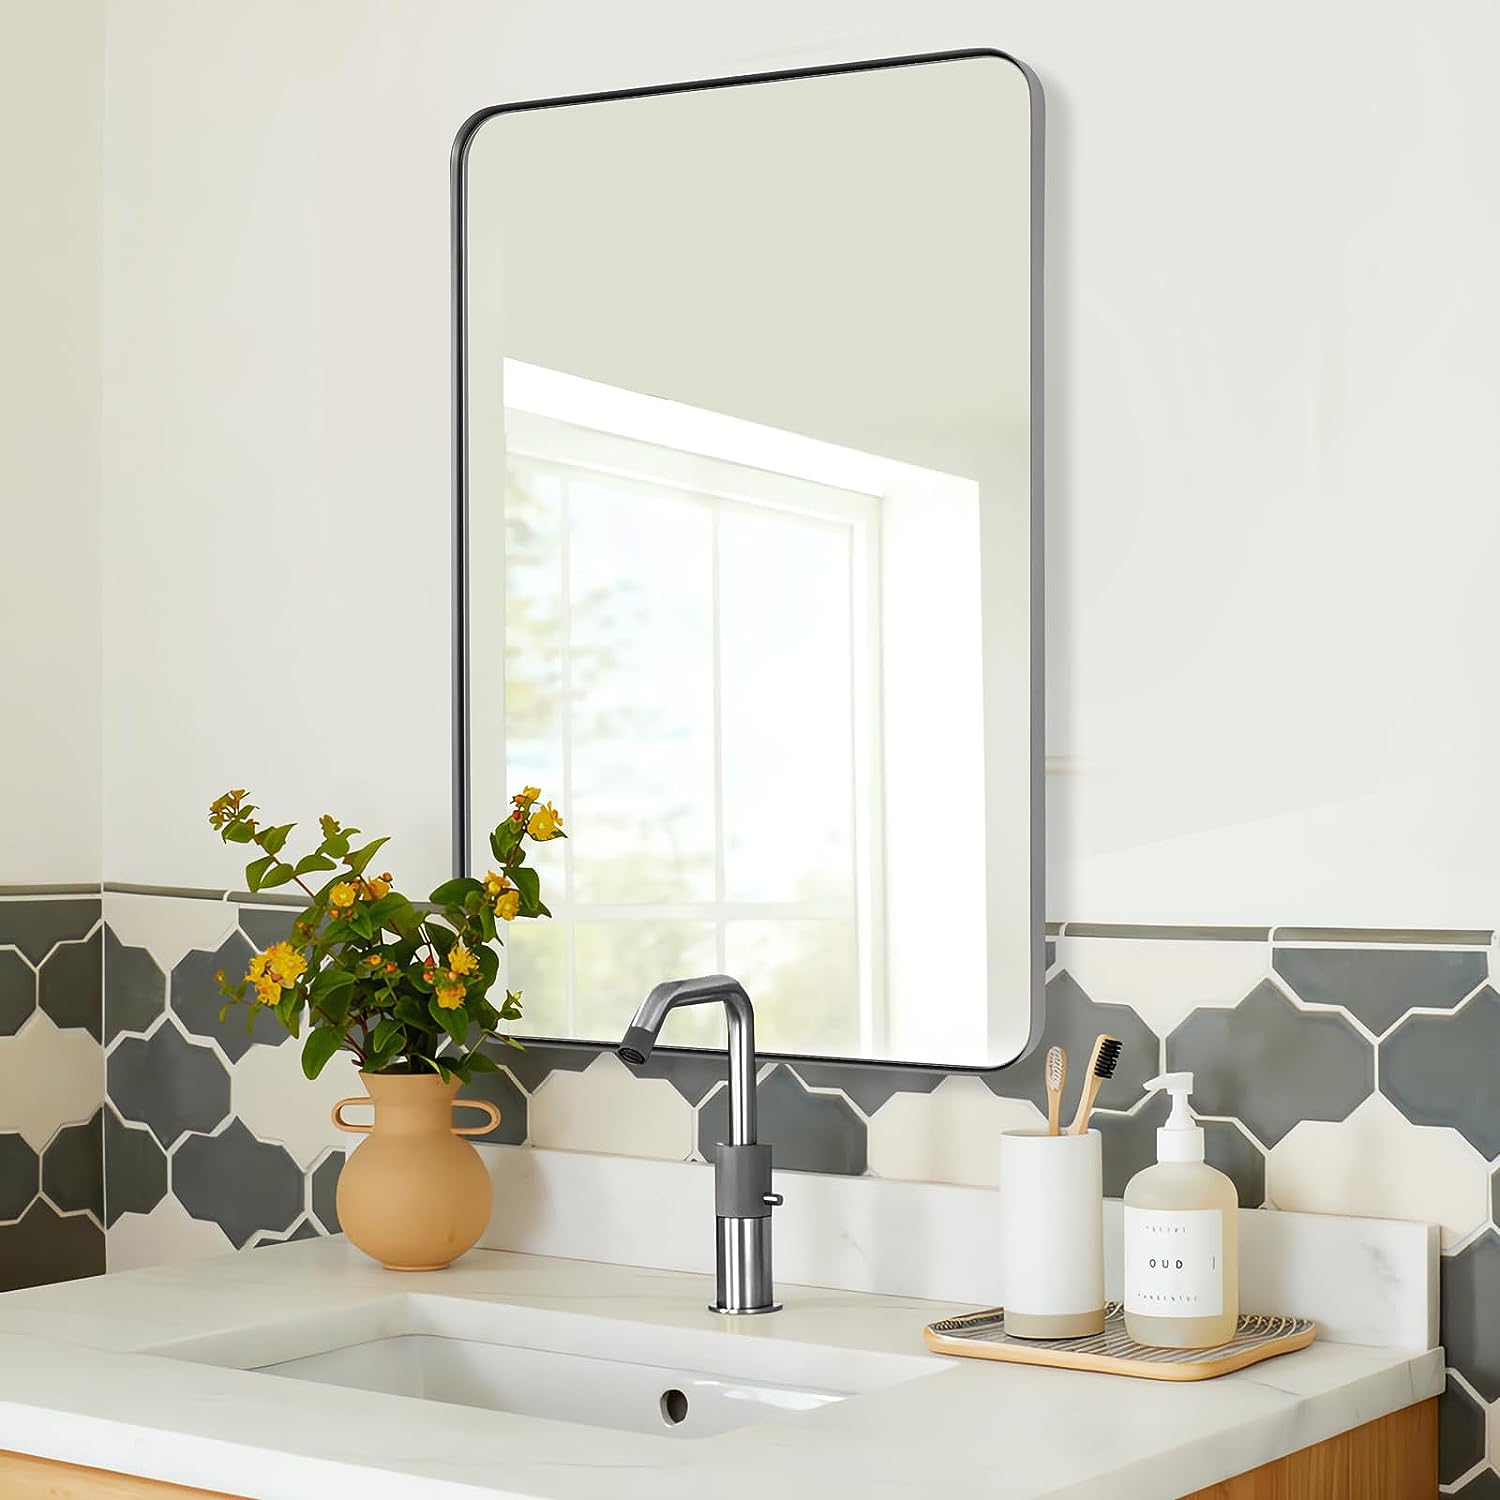 Contemporary Rounded Rectangle Mirror for Bathroom/Vanity | Stainless Steel Frame